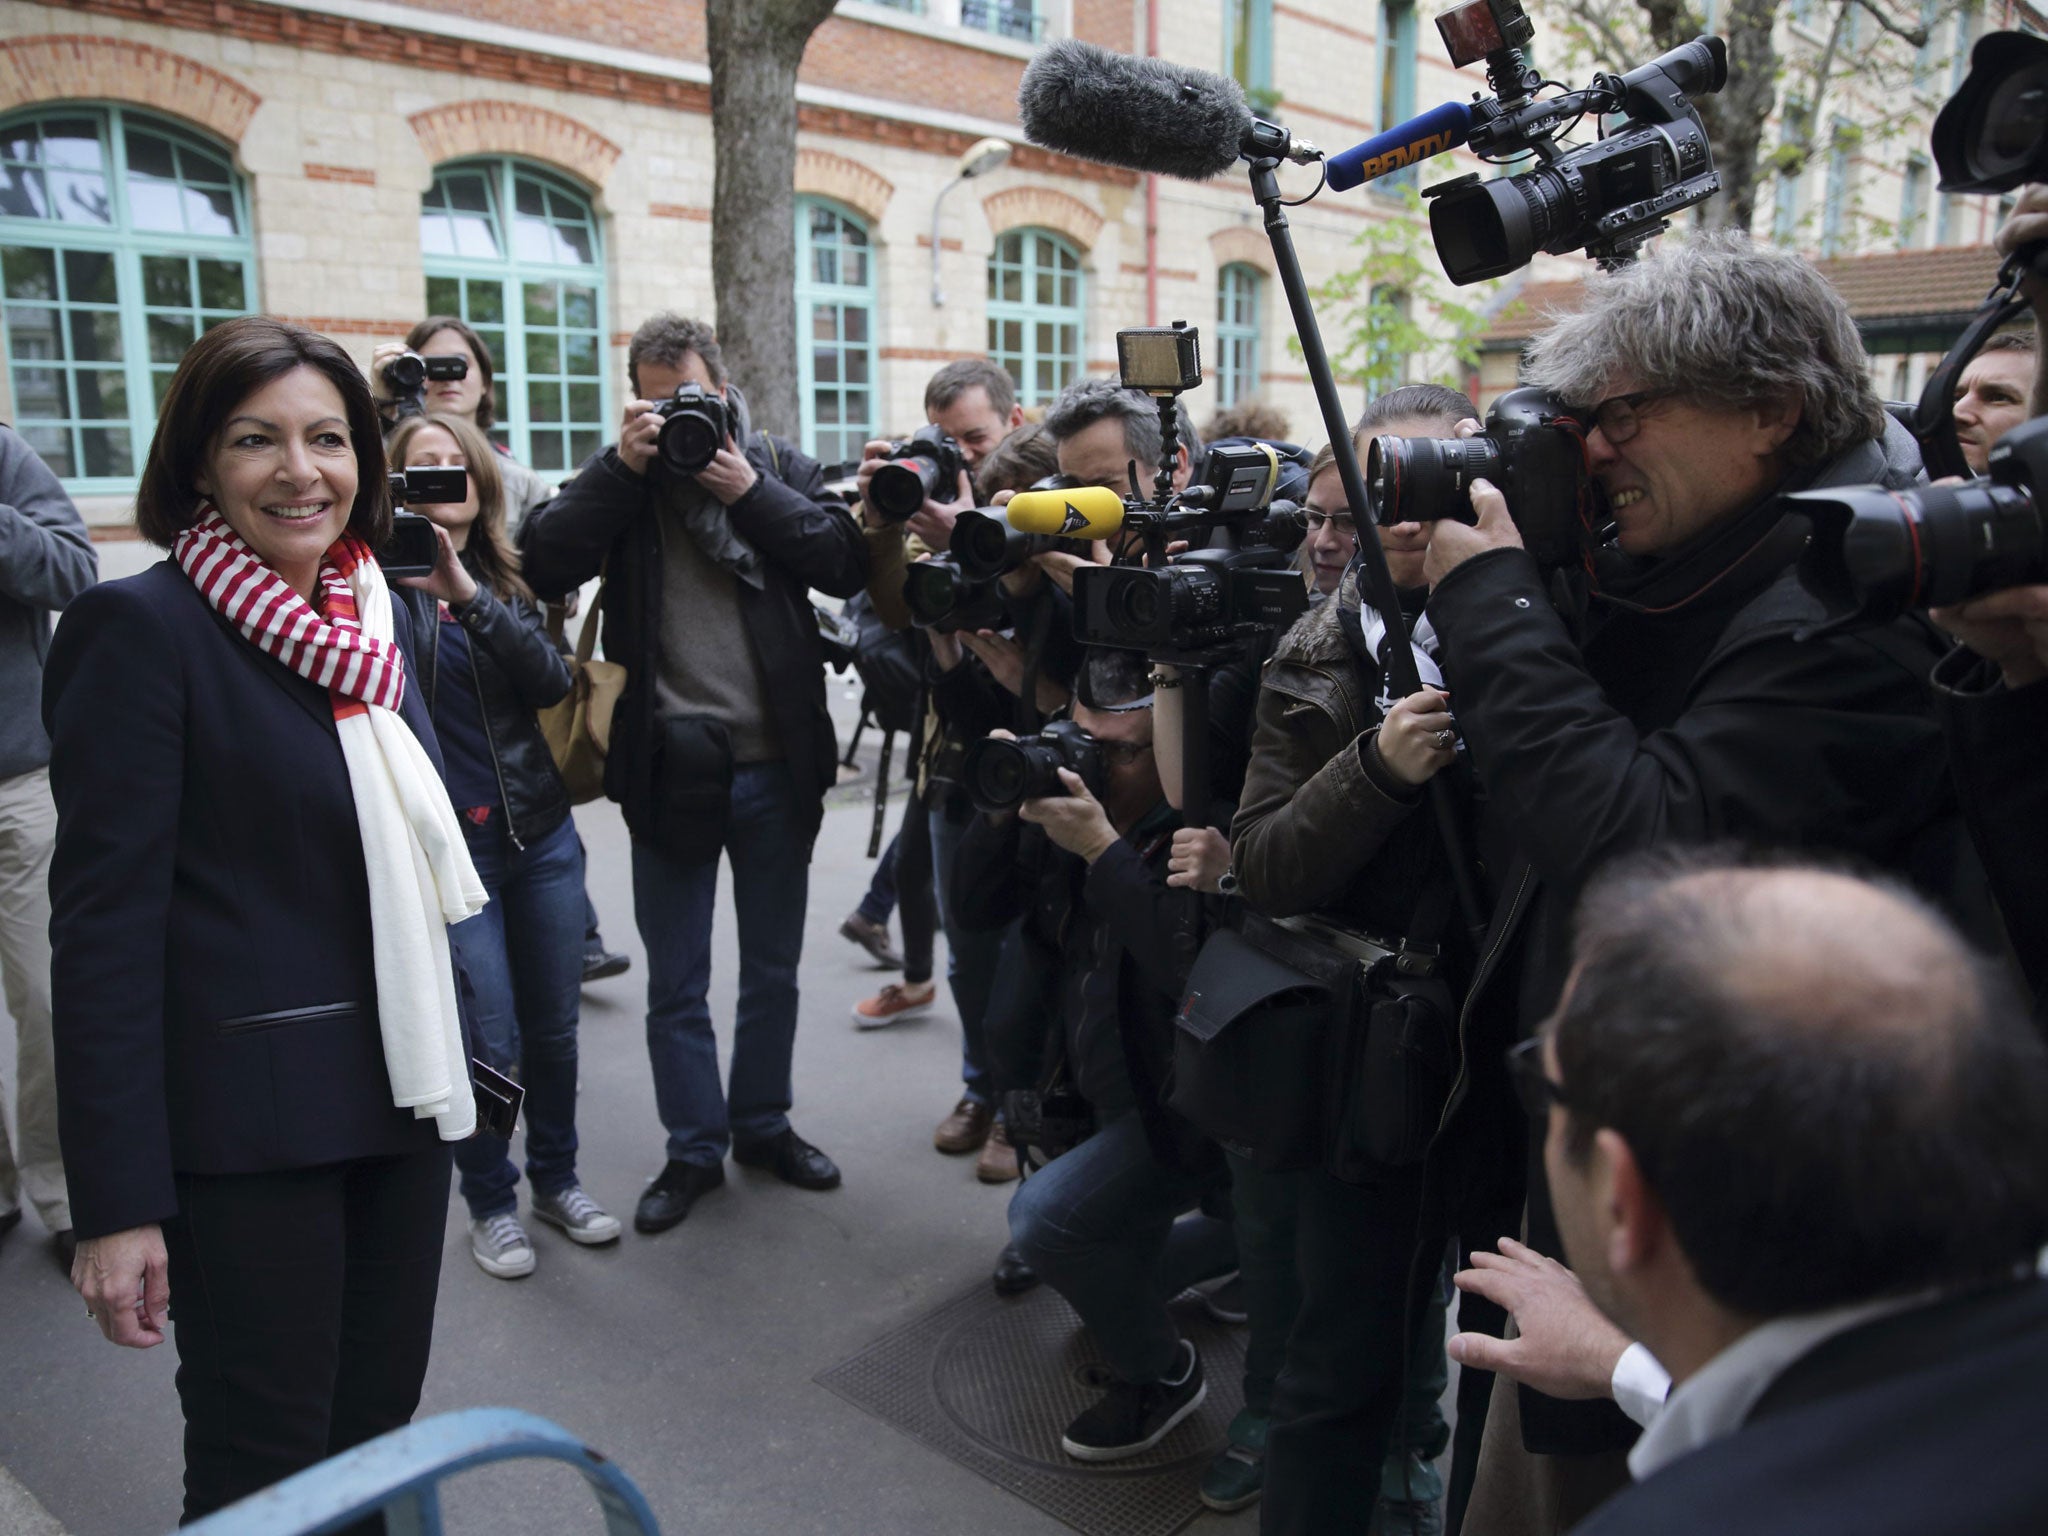 &#13;
Anne Hidalgo, the mayor of Paris, was criticised for renting the catacombs out by political opponents&#13;